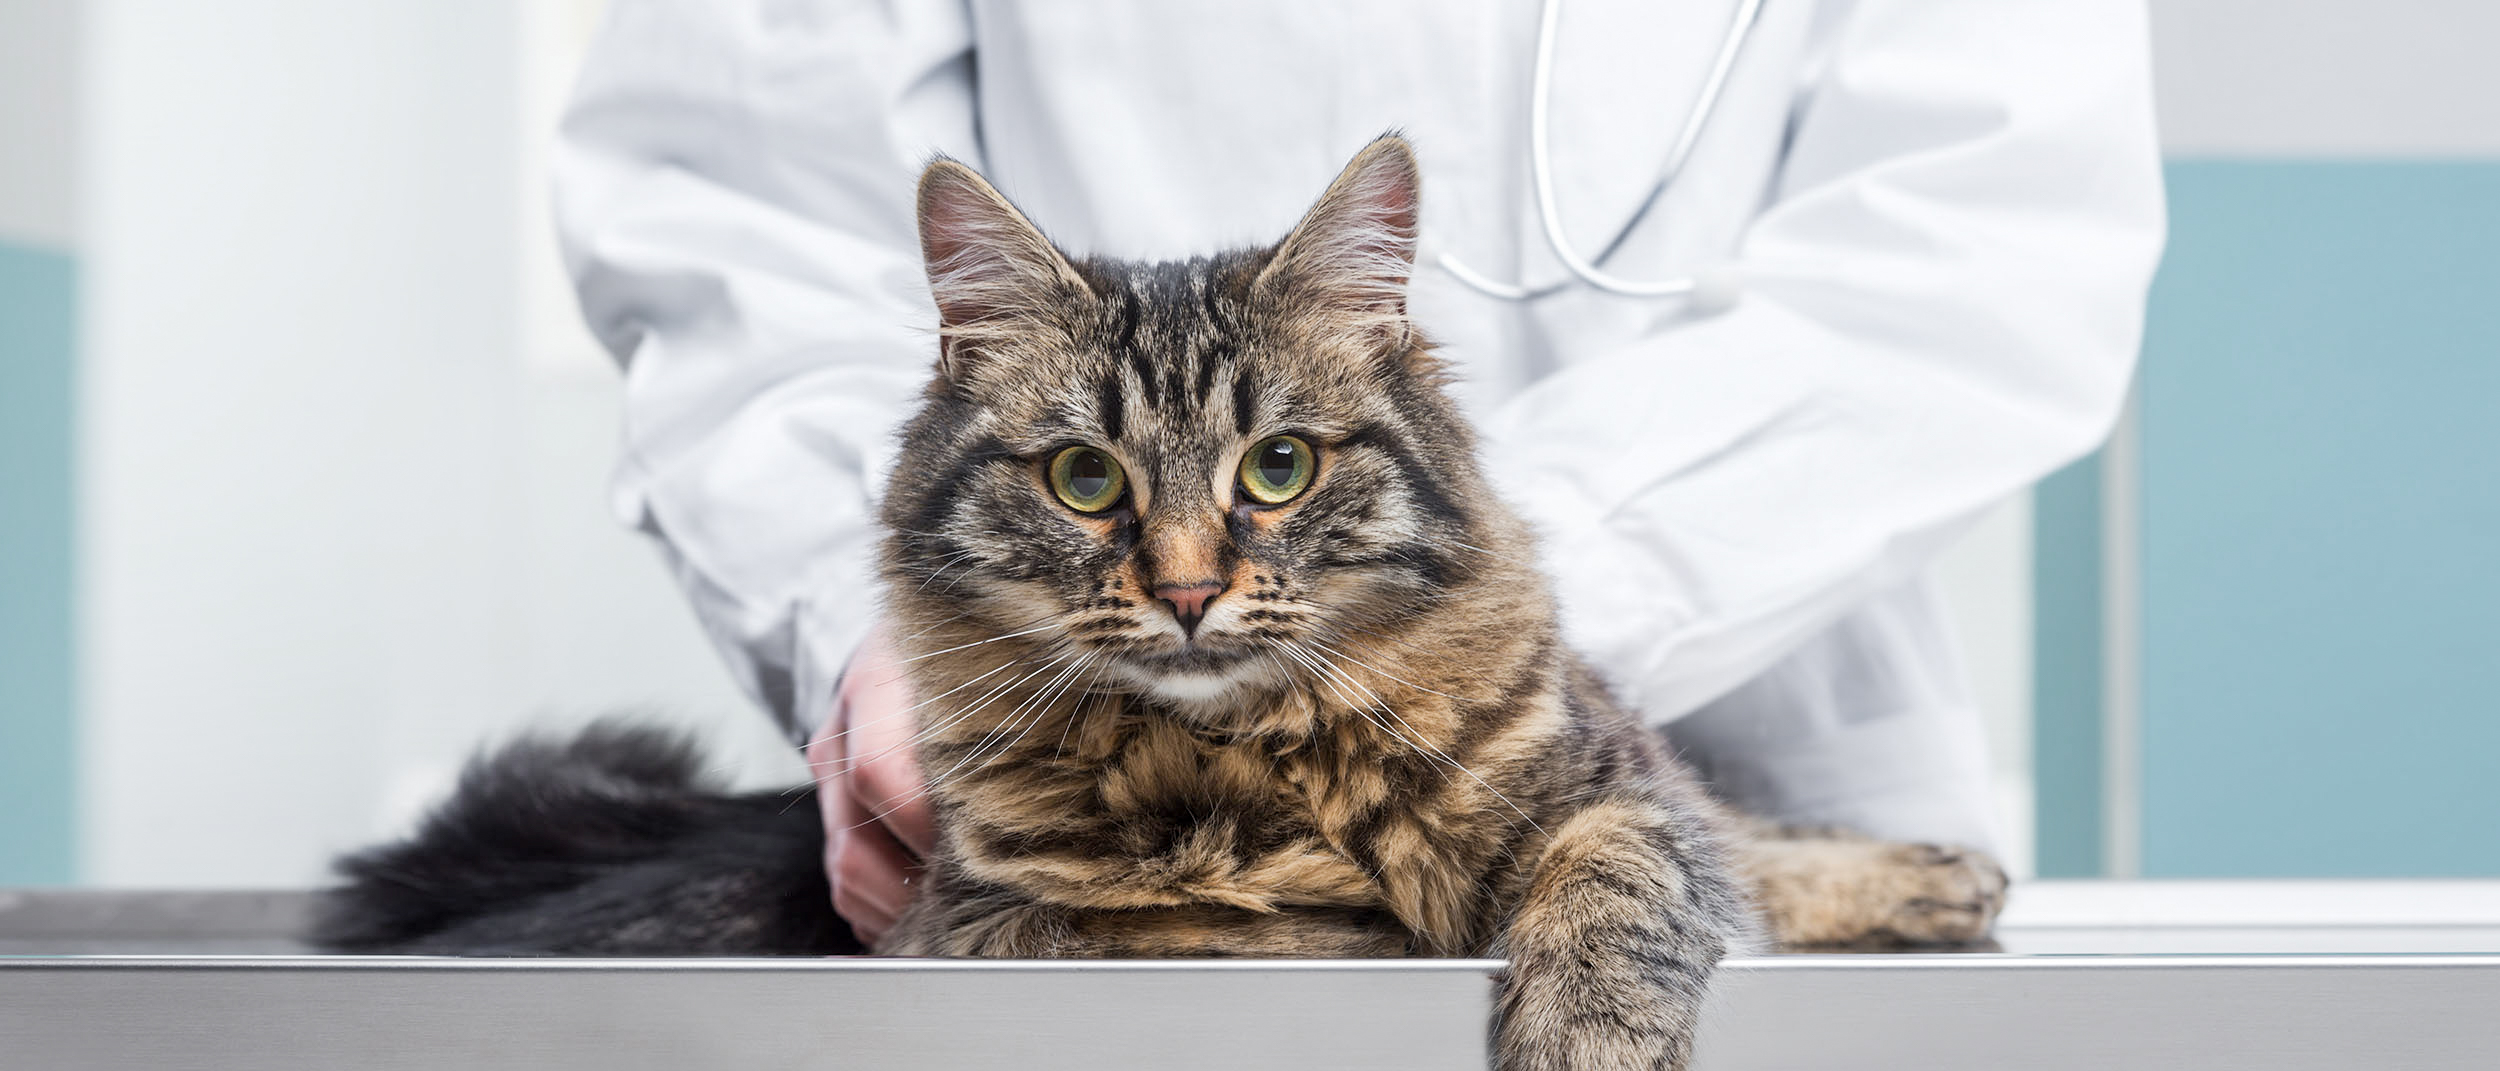 Adult Maine Coon lying down on an examination table being checked over by a vet.